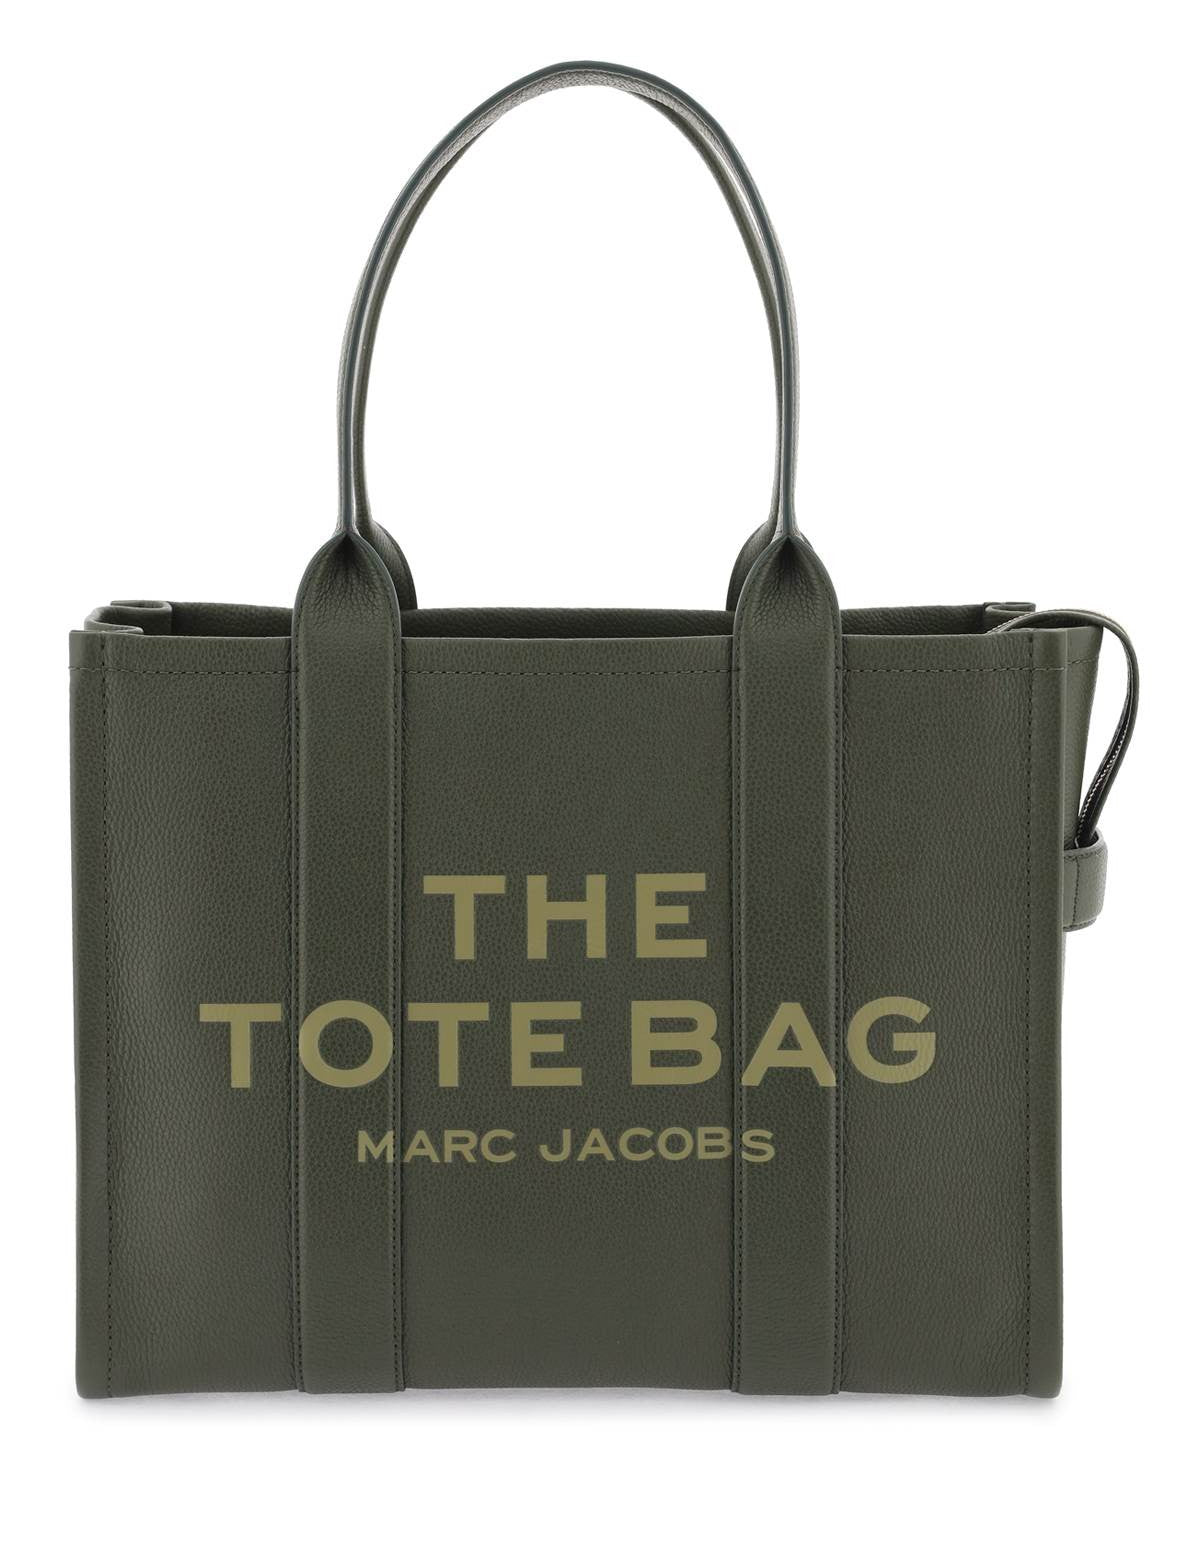 marc-jacobs-the-leather-large-tote-bag_ce968b93-4af3-409e-935f-9d46b16f5f48.jpg